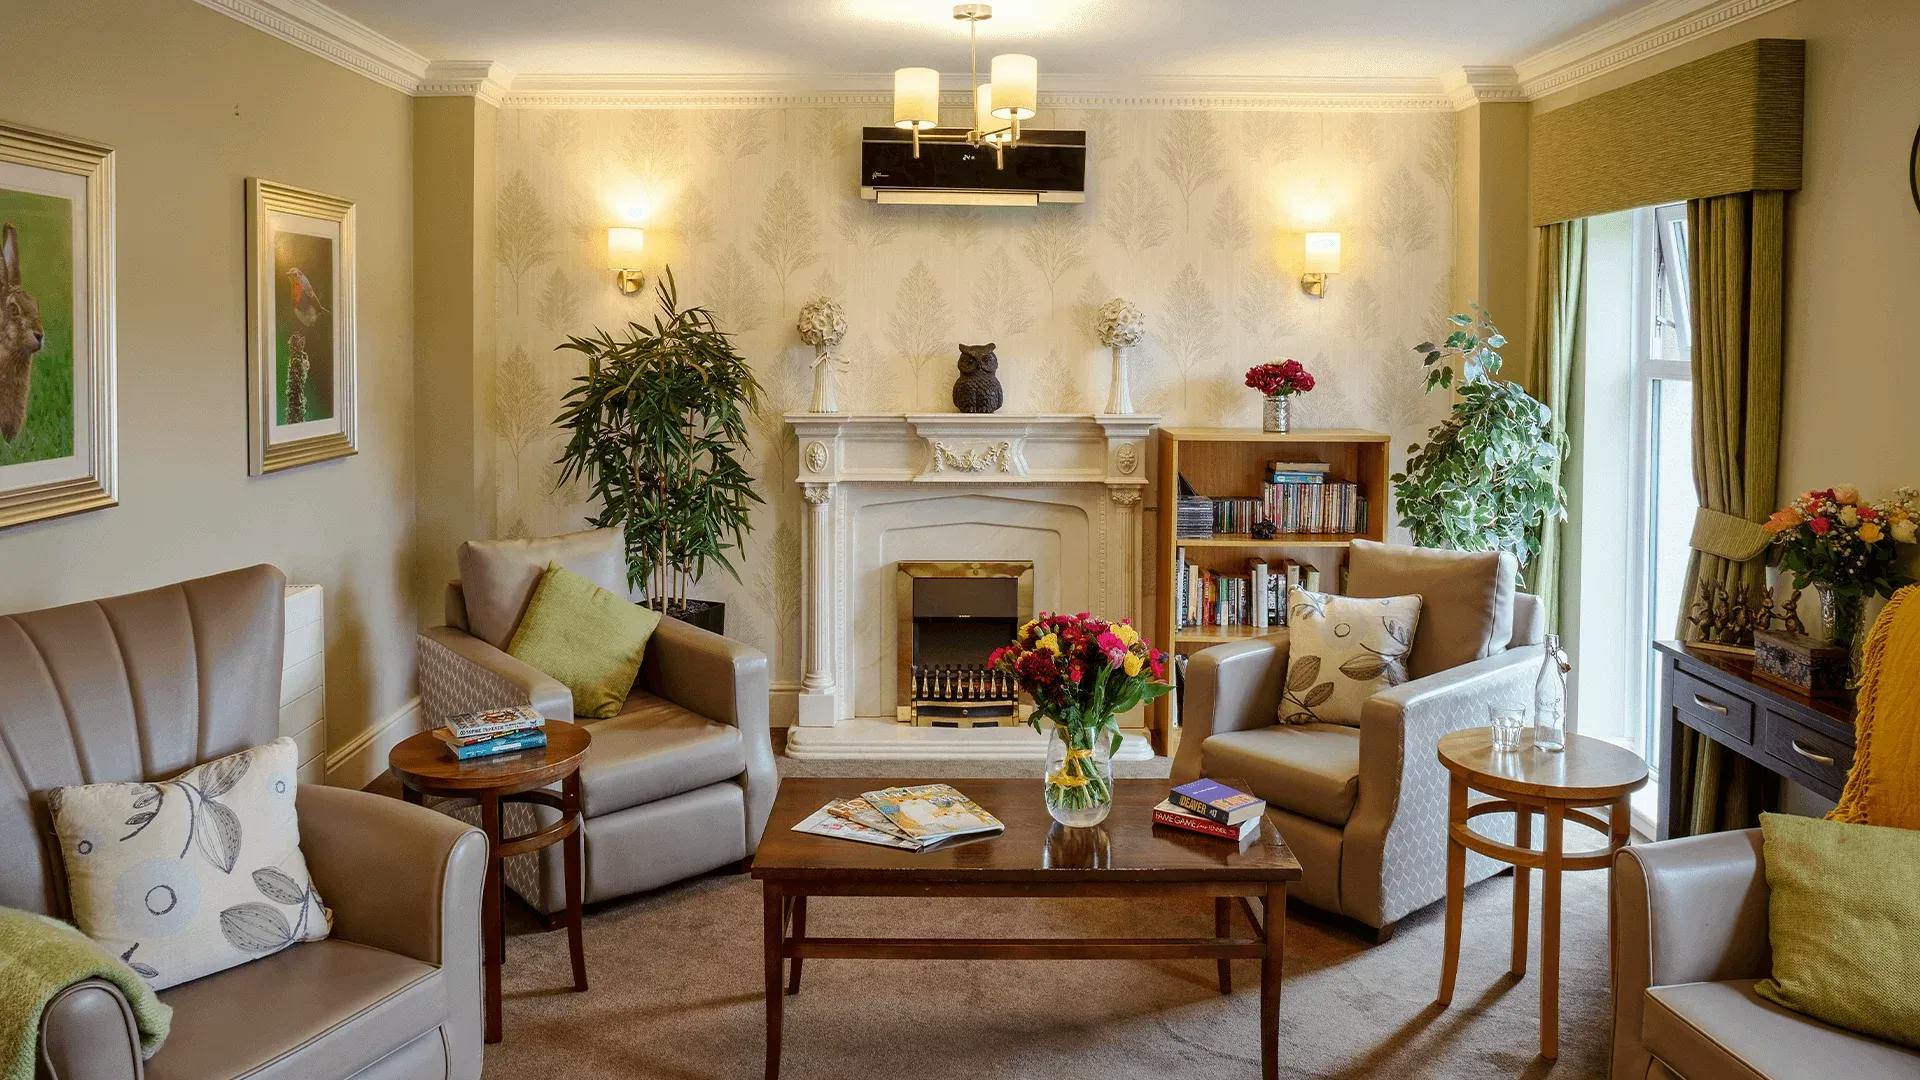 The lounge area at Newcross Care Home in Wolverhampton, West Midlands